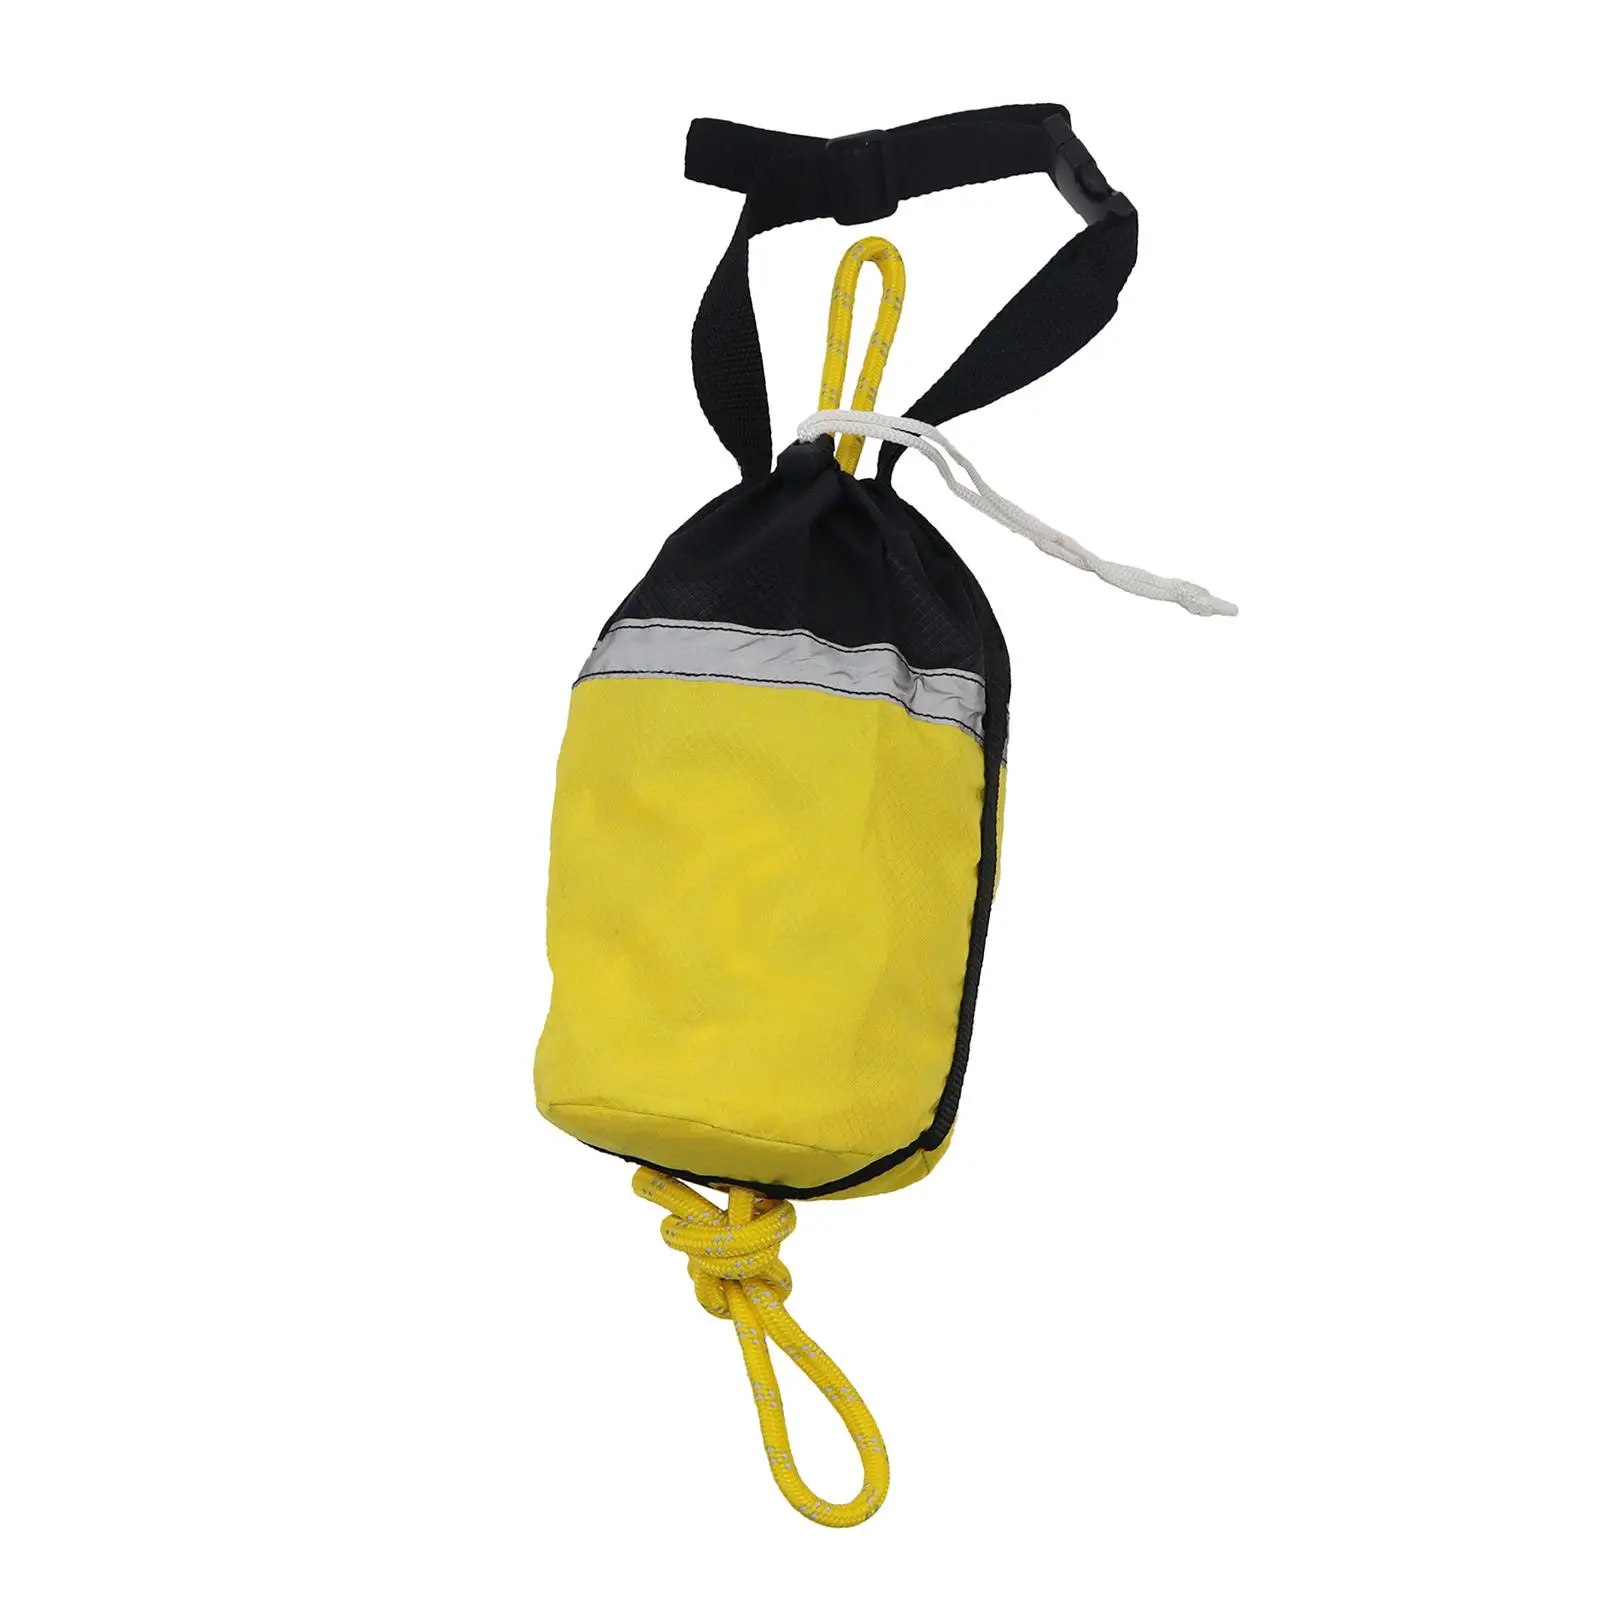 Kayak Throw Bag Marine High Visibility 16M Throw Rope for Boating Outdoor Accessory